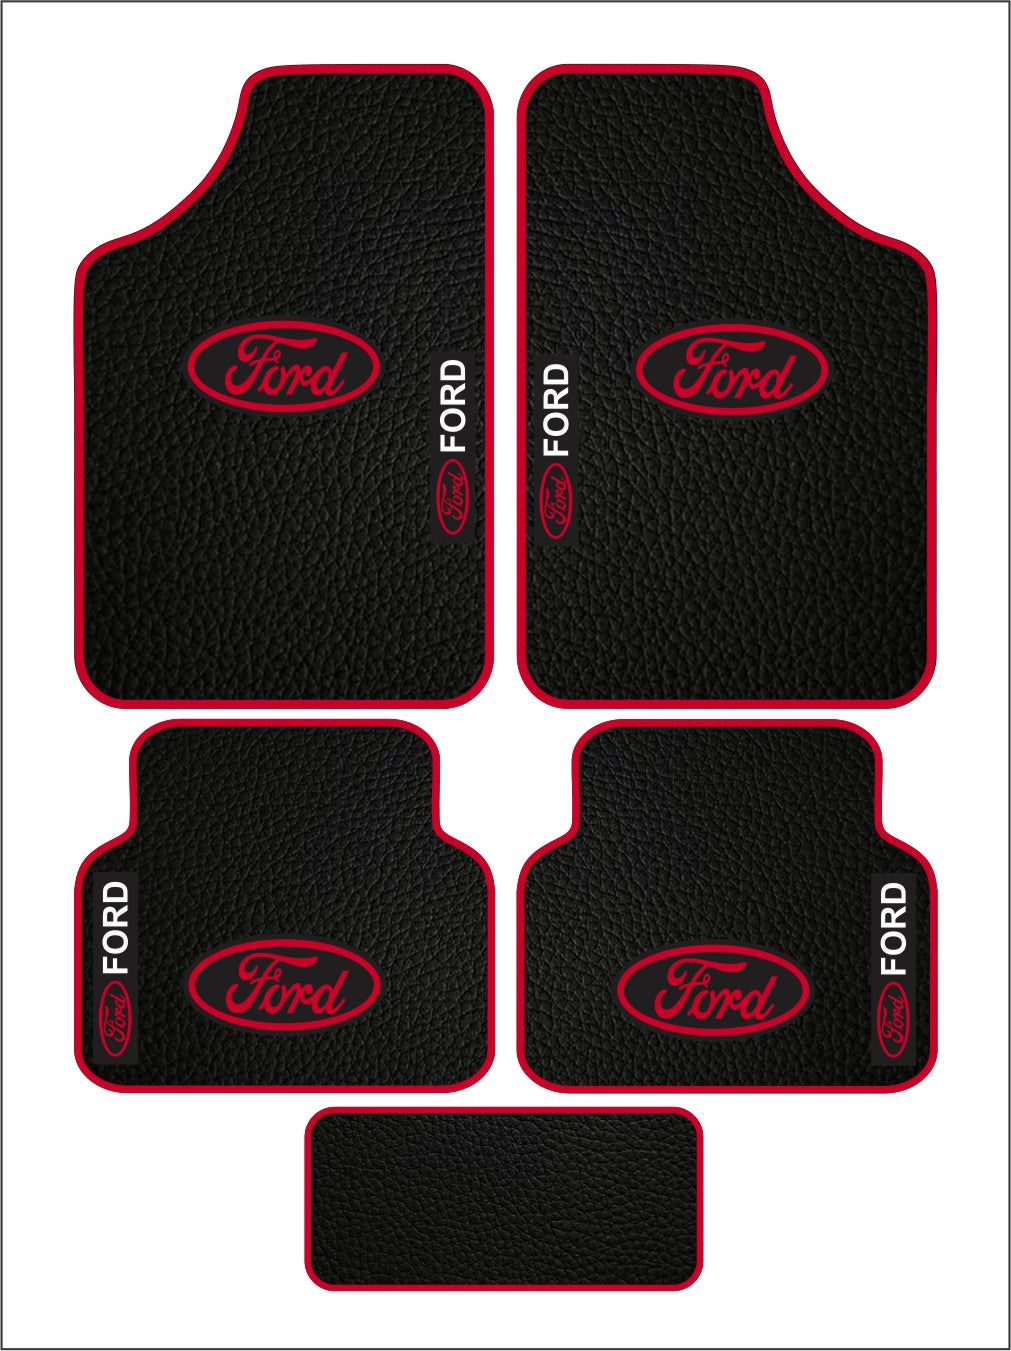 Ford Universal PVC Leather Floor Mats Set of 5